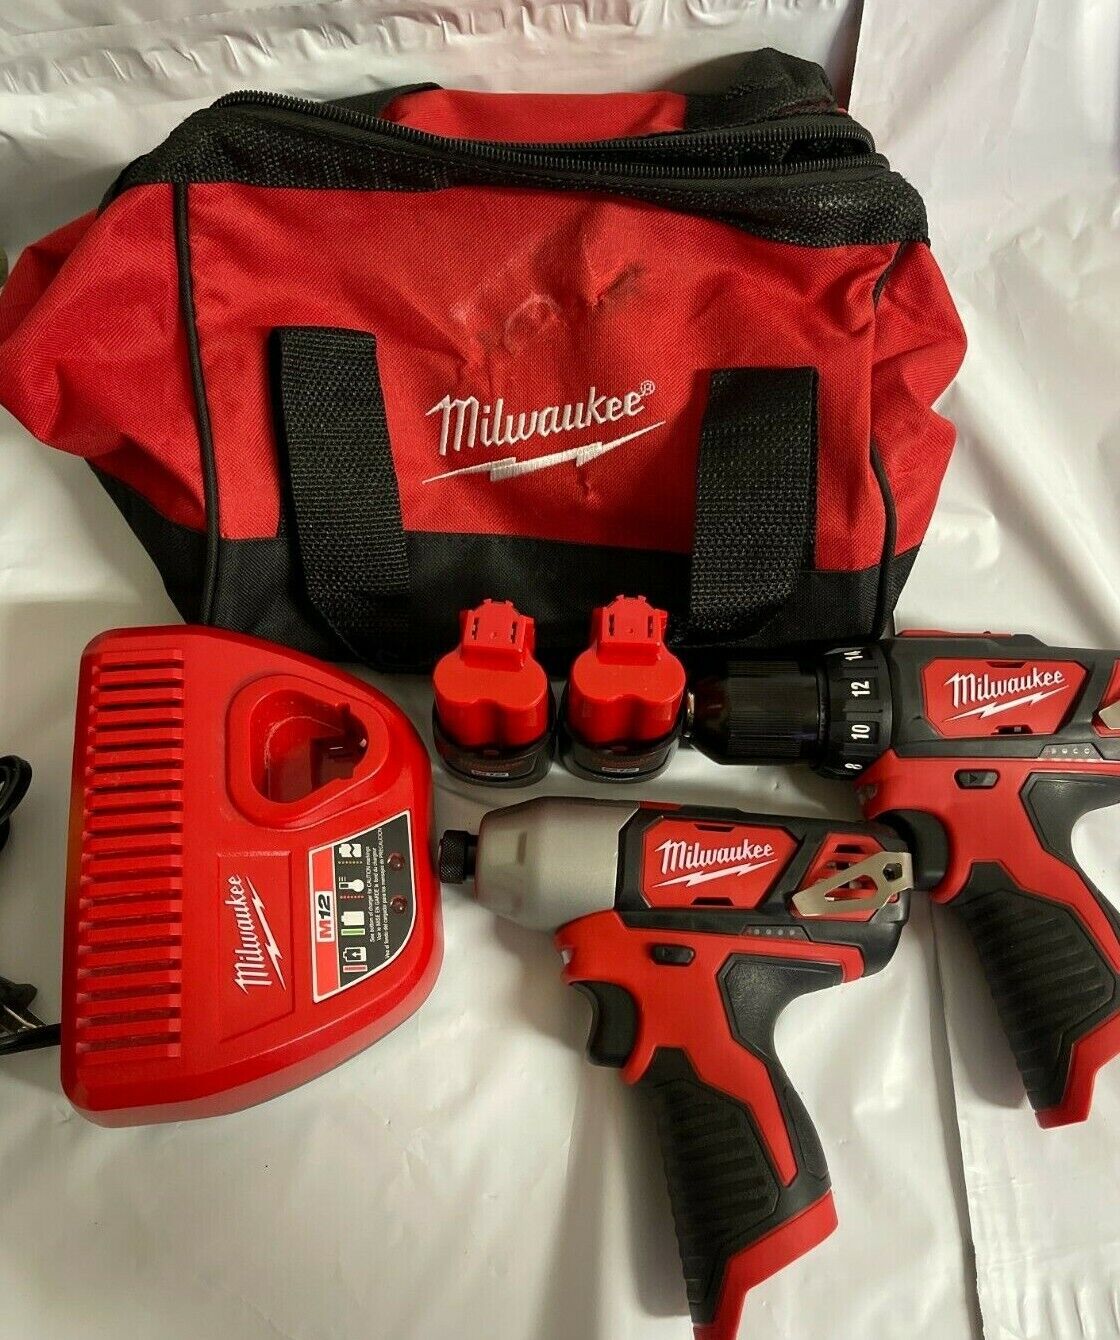 Milwaukee 2494-22 M12 3/8 in. Drill Driver and 1/4 in.Hex Impact Driver Kit, GR Popularna okazja